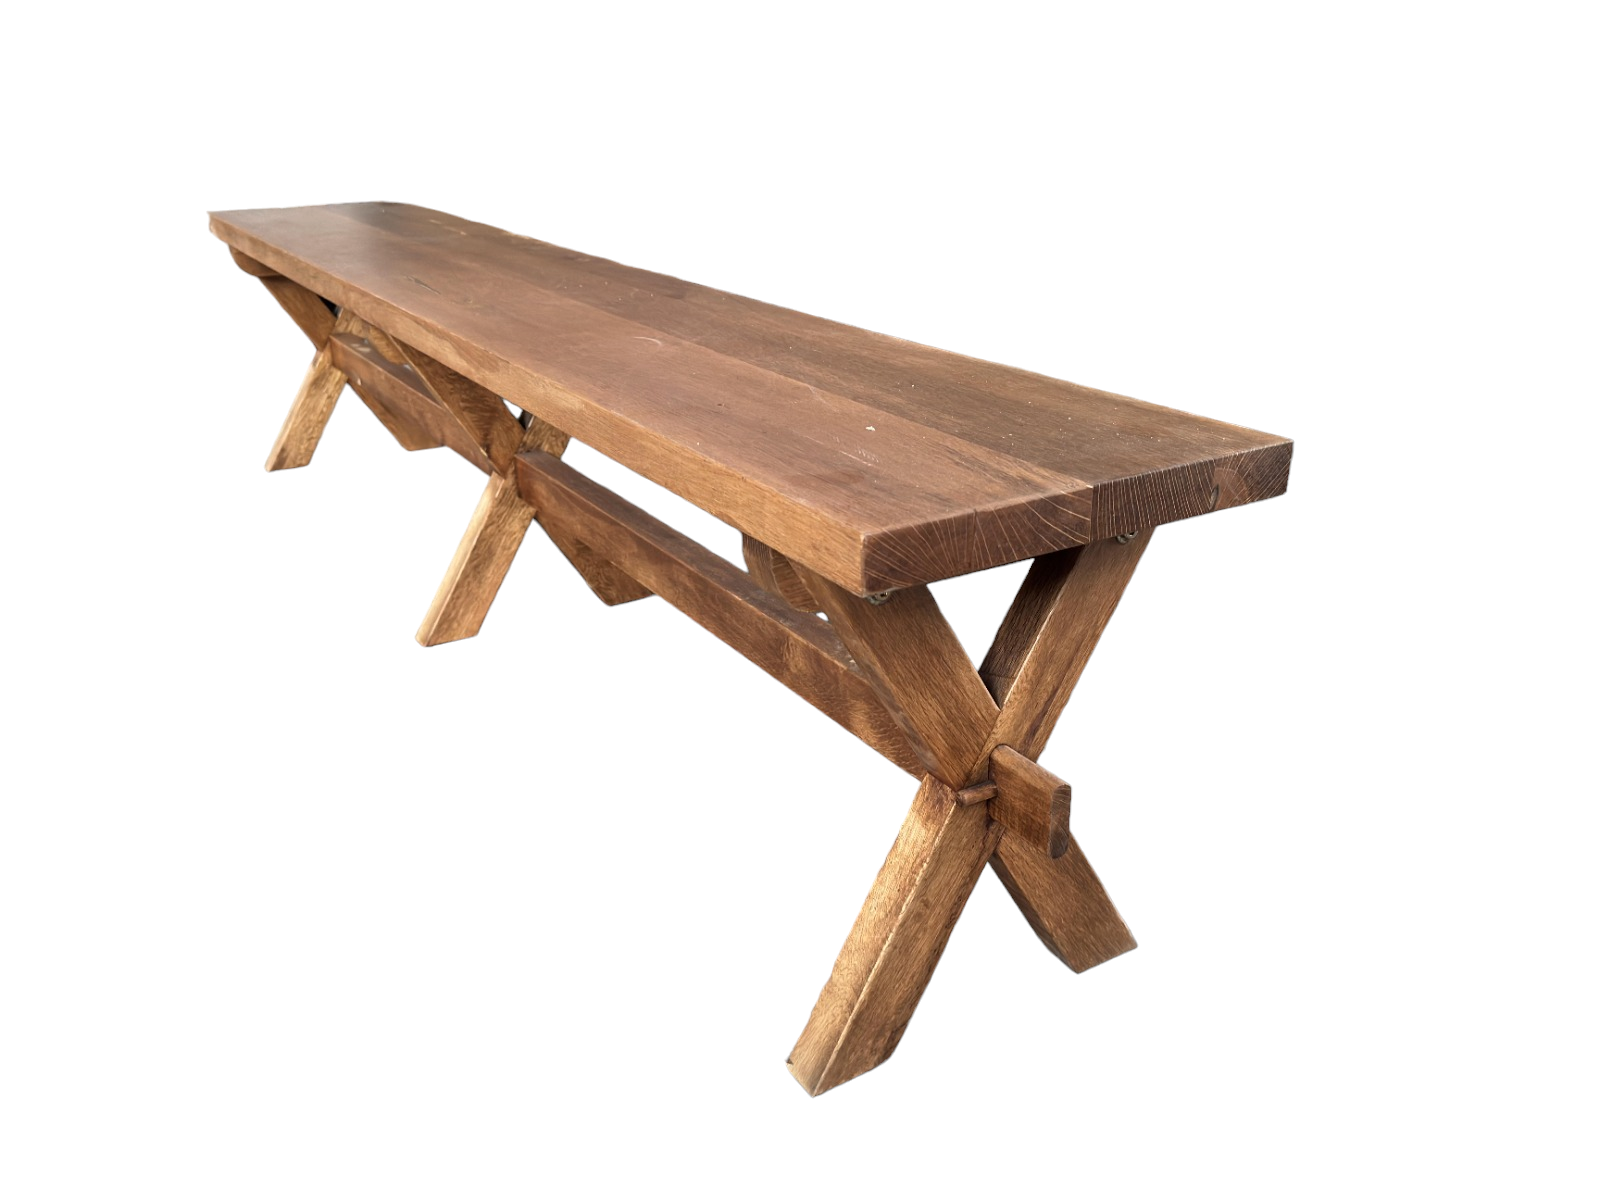 wooden ceremony benches for hire <a href='#' class='view-taggged-products' data-id=7847>Click to View Products</a><div class='taggged-products-slider-wrap'><div class='heading-tag-products'></div><div class='taggged-products-slider'></div></div><div class='loading-spinner'><i class='fa fa-spinner fa-spin'></i></div>